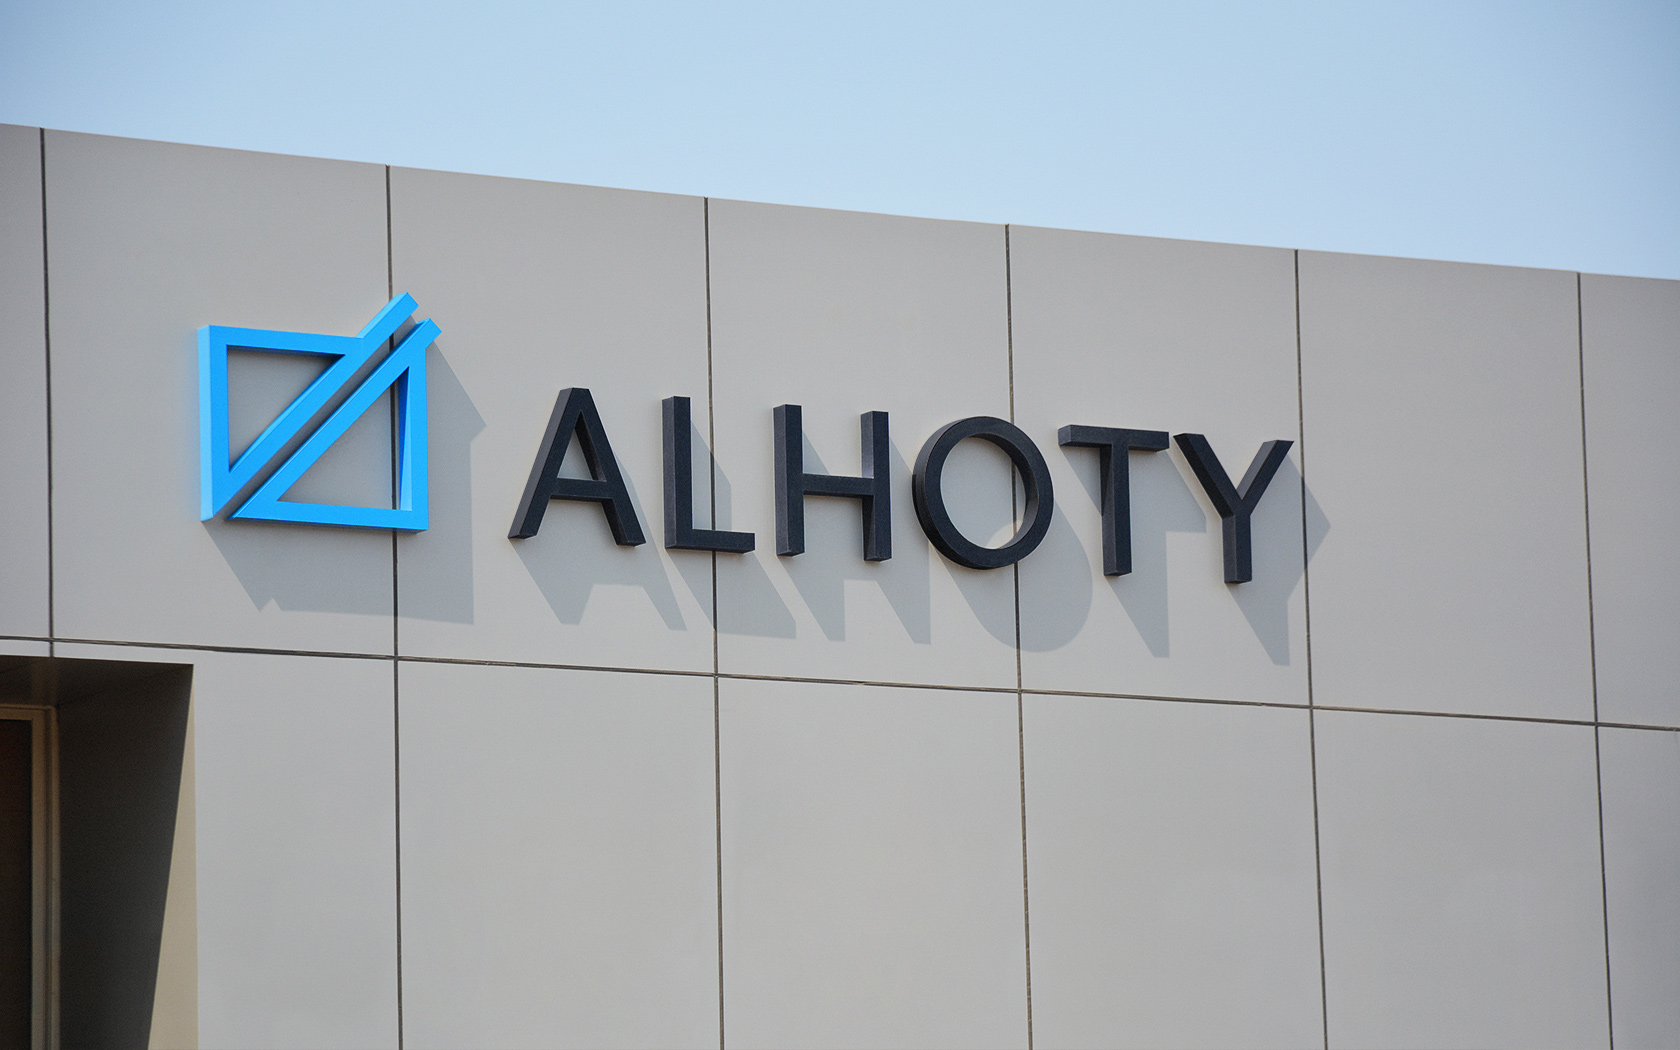 Alhoty. Building Sign